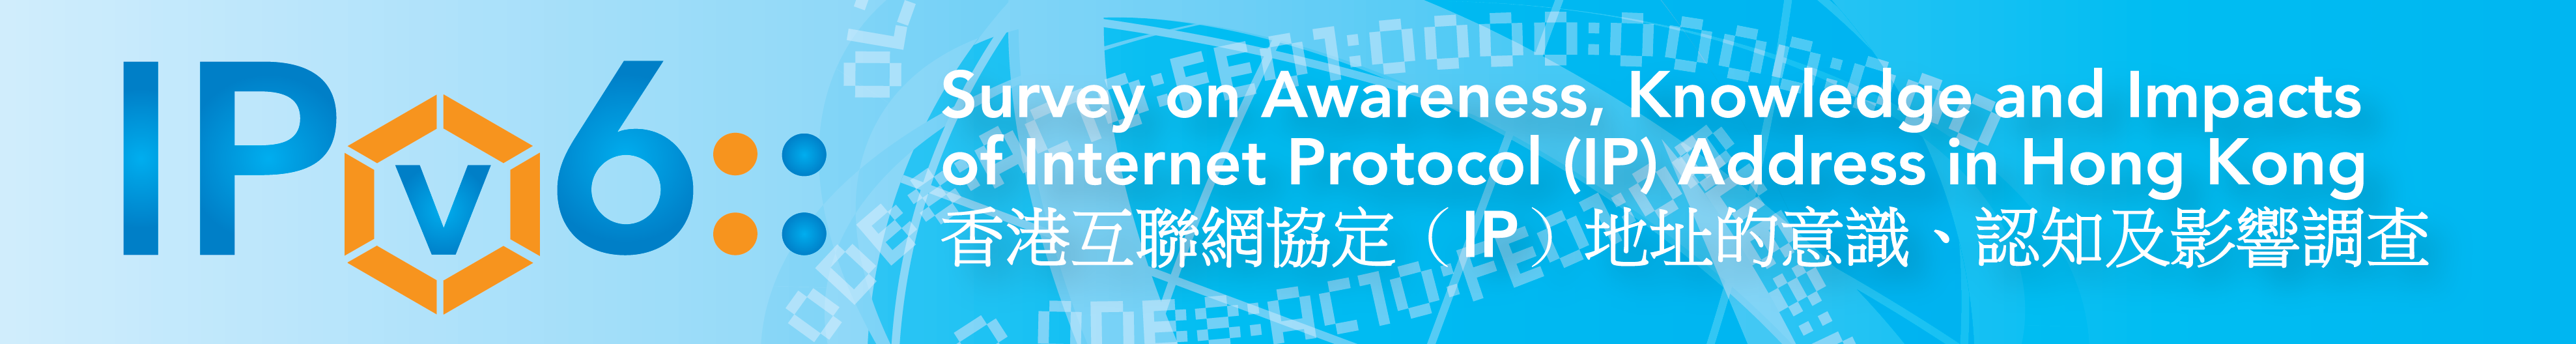 Image - IPv6 Survey on Awareness, Knowledge and Impact of Internet Protocal (IP) Address in Hong Kong